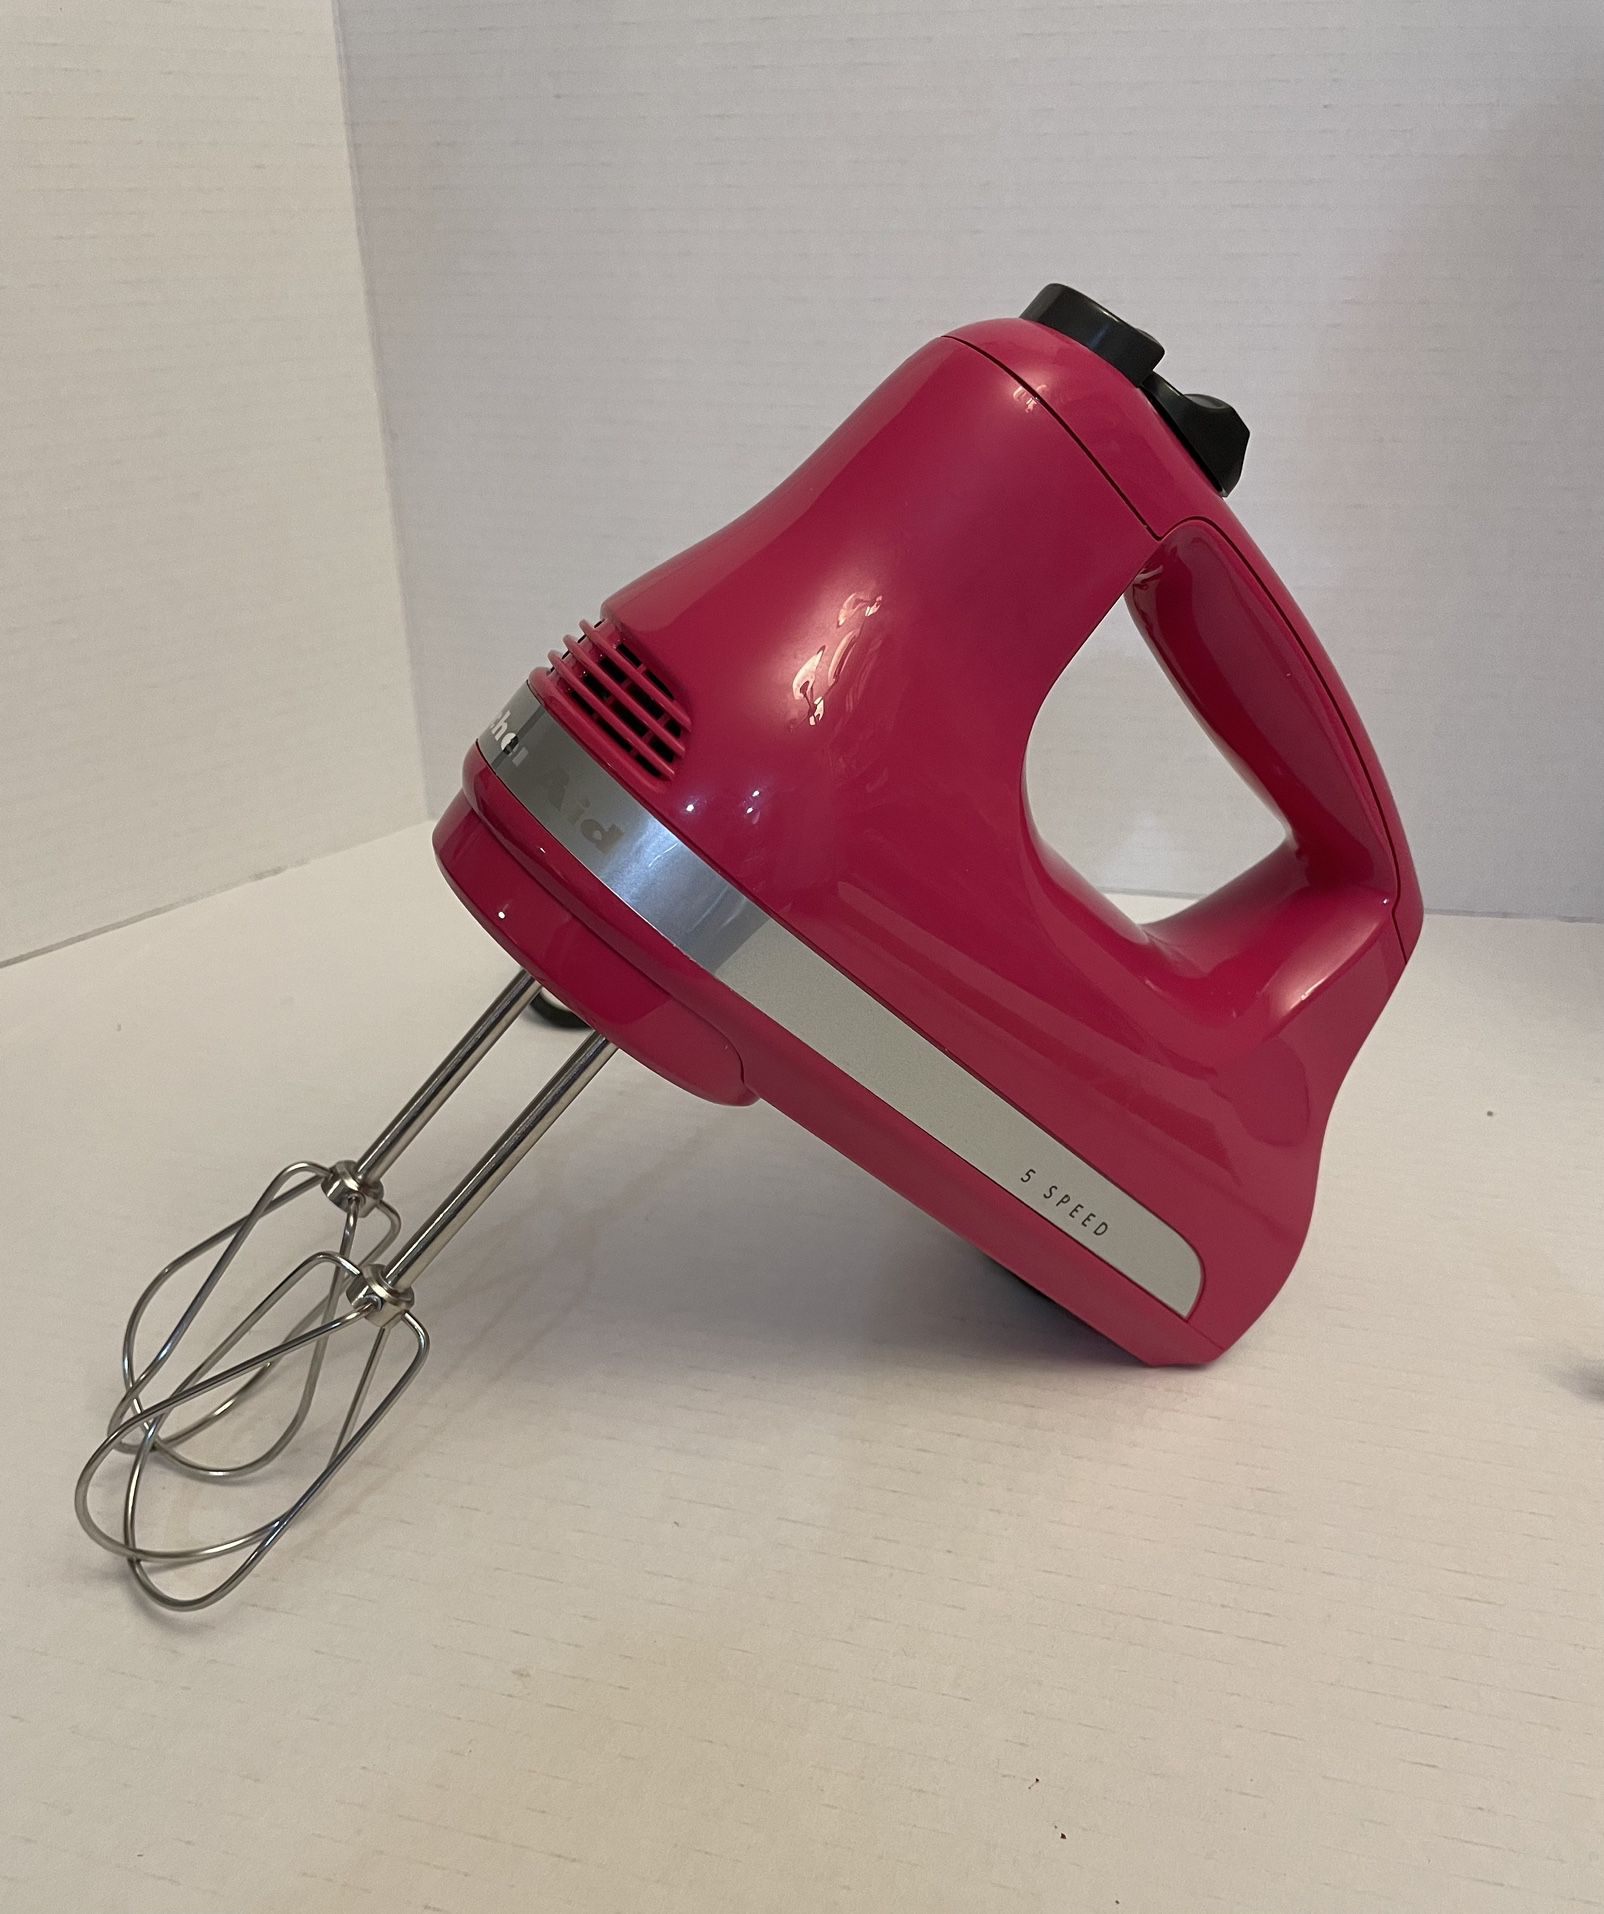 Hot Pink KitchenAid Hand Mixer for Sale in Salem, OR - OfferUp